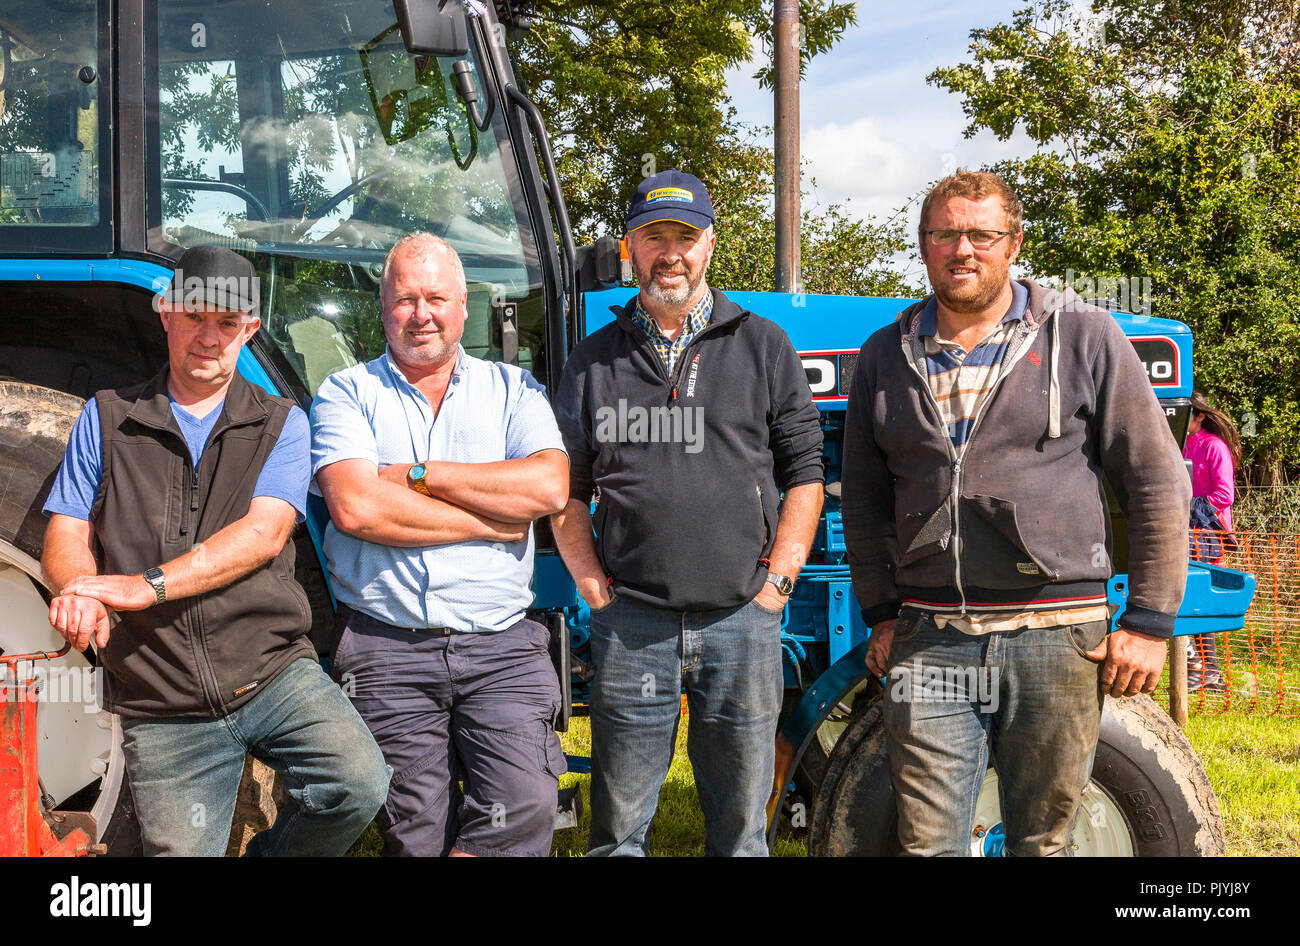 Timoleague, Cork, Ireland. 9th September 2018. Fachtna McCarthy, Rosscarbery, Ricky O'Leary, John Jo O'Leary, Bandon and Leslie Wolfe at the West Cork Vintage Ploughing & Threshing event that was held at Barryshall Timoleague Co.Cork. Credit: David Creedon/Alamy Live News Stock Photo